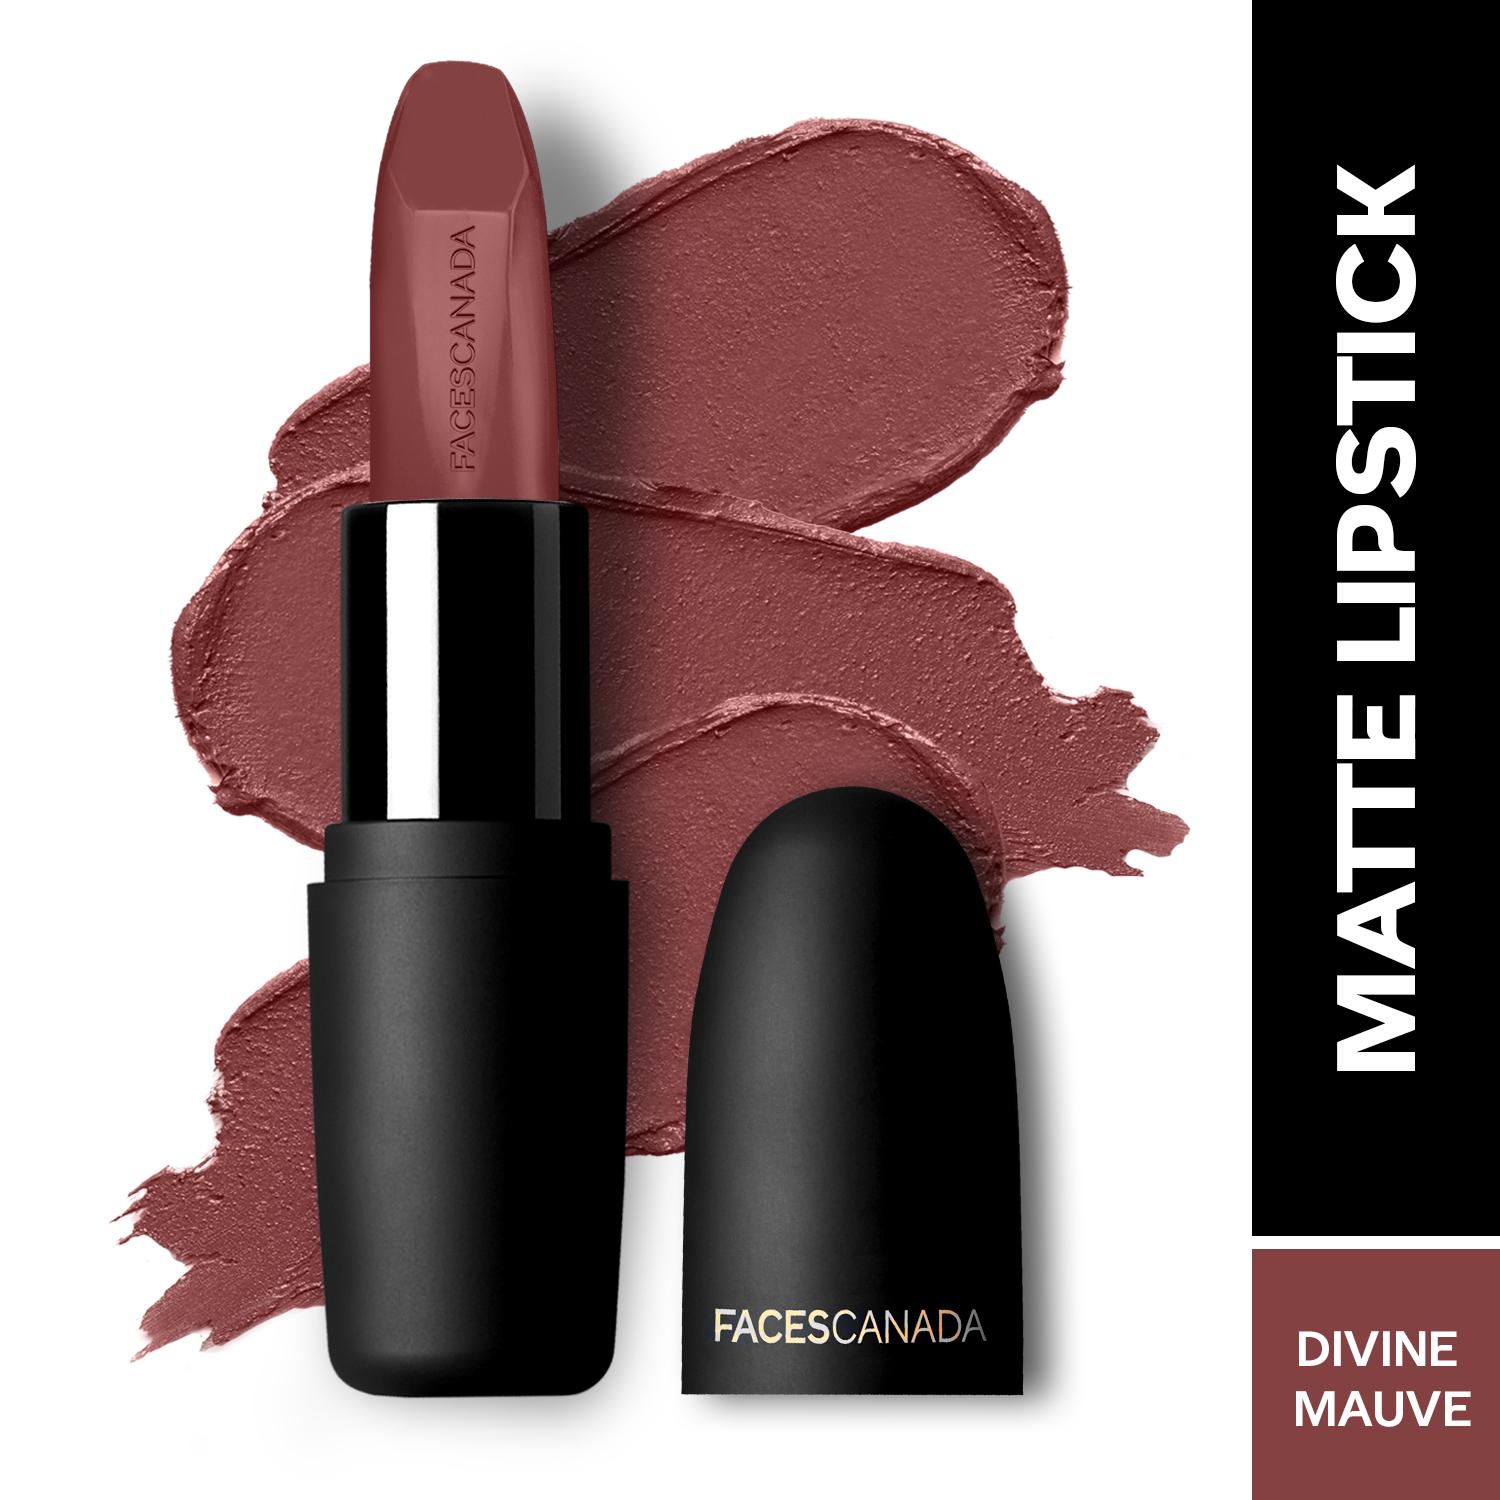 Faces Canada | Faces Canada Weightless Matte Lipstick, Pigmented and Hydrated Lips - Divine Mauve 17 (4.5 g)